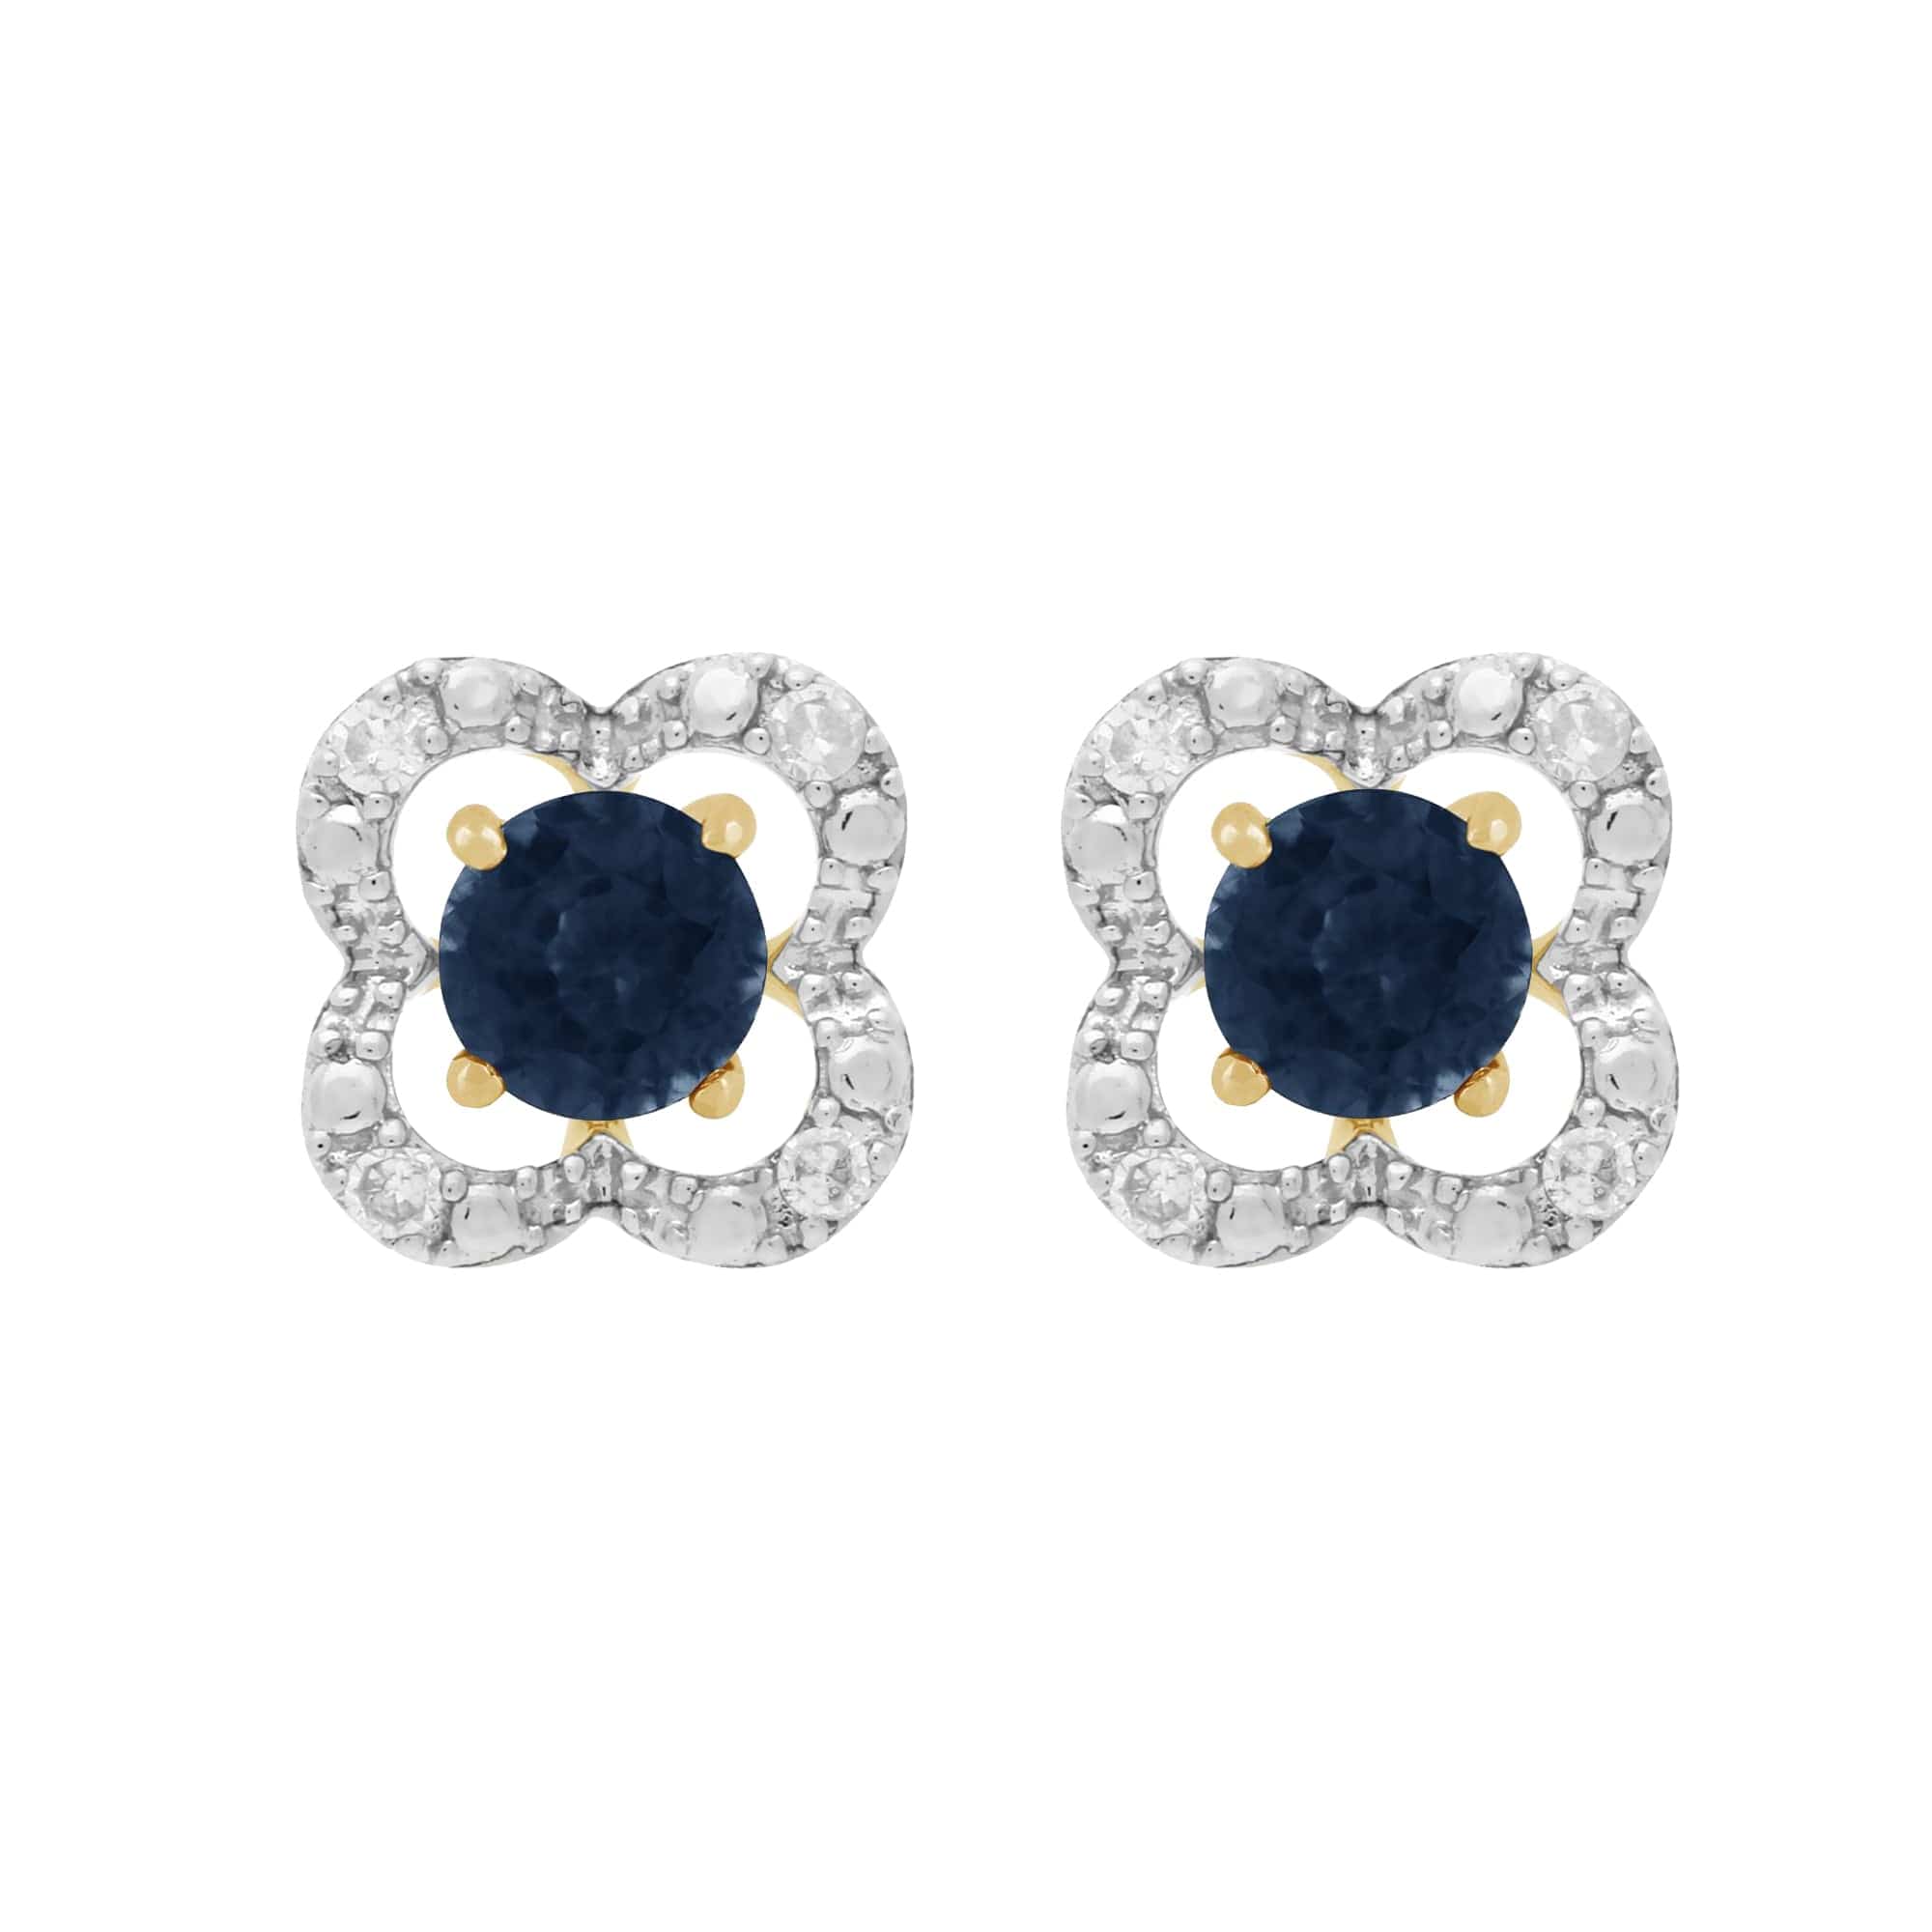 183E0083409-191E0375019 Classic Round Blue Sapphire Studs with Detachable Diamond Floral Ear Jacket in 9ct Yellow Gold 1